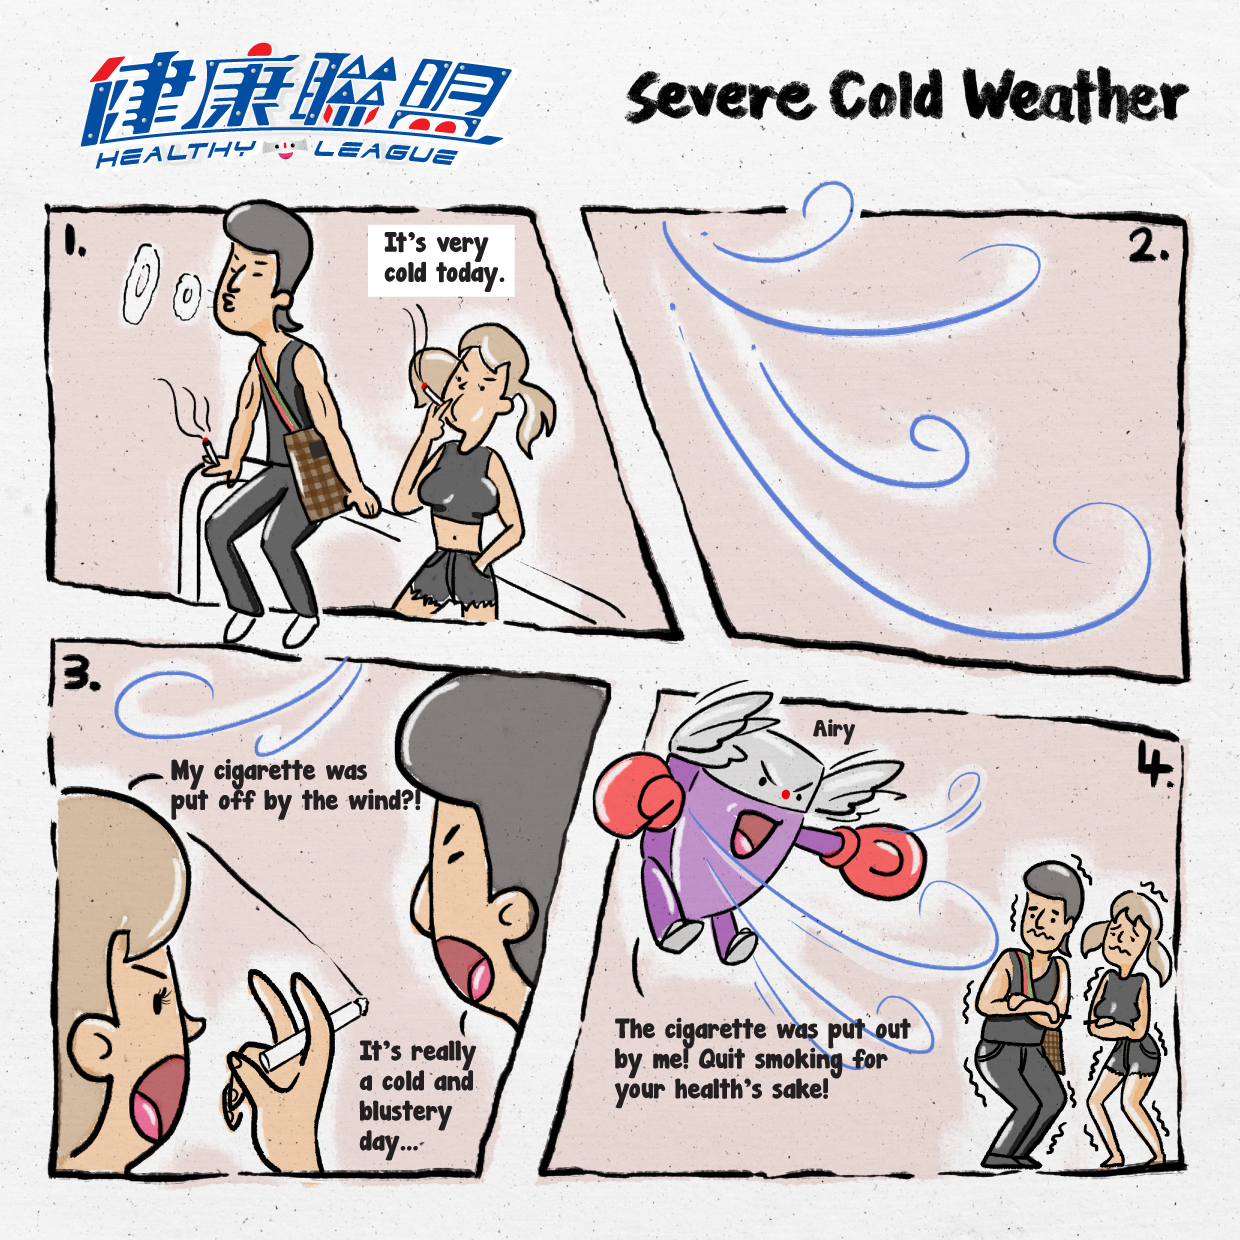 SEVERE COLD WEATHER